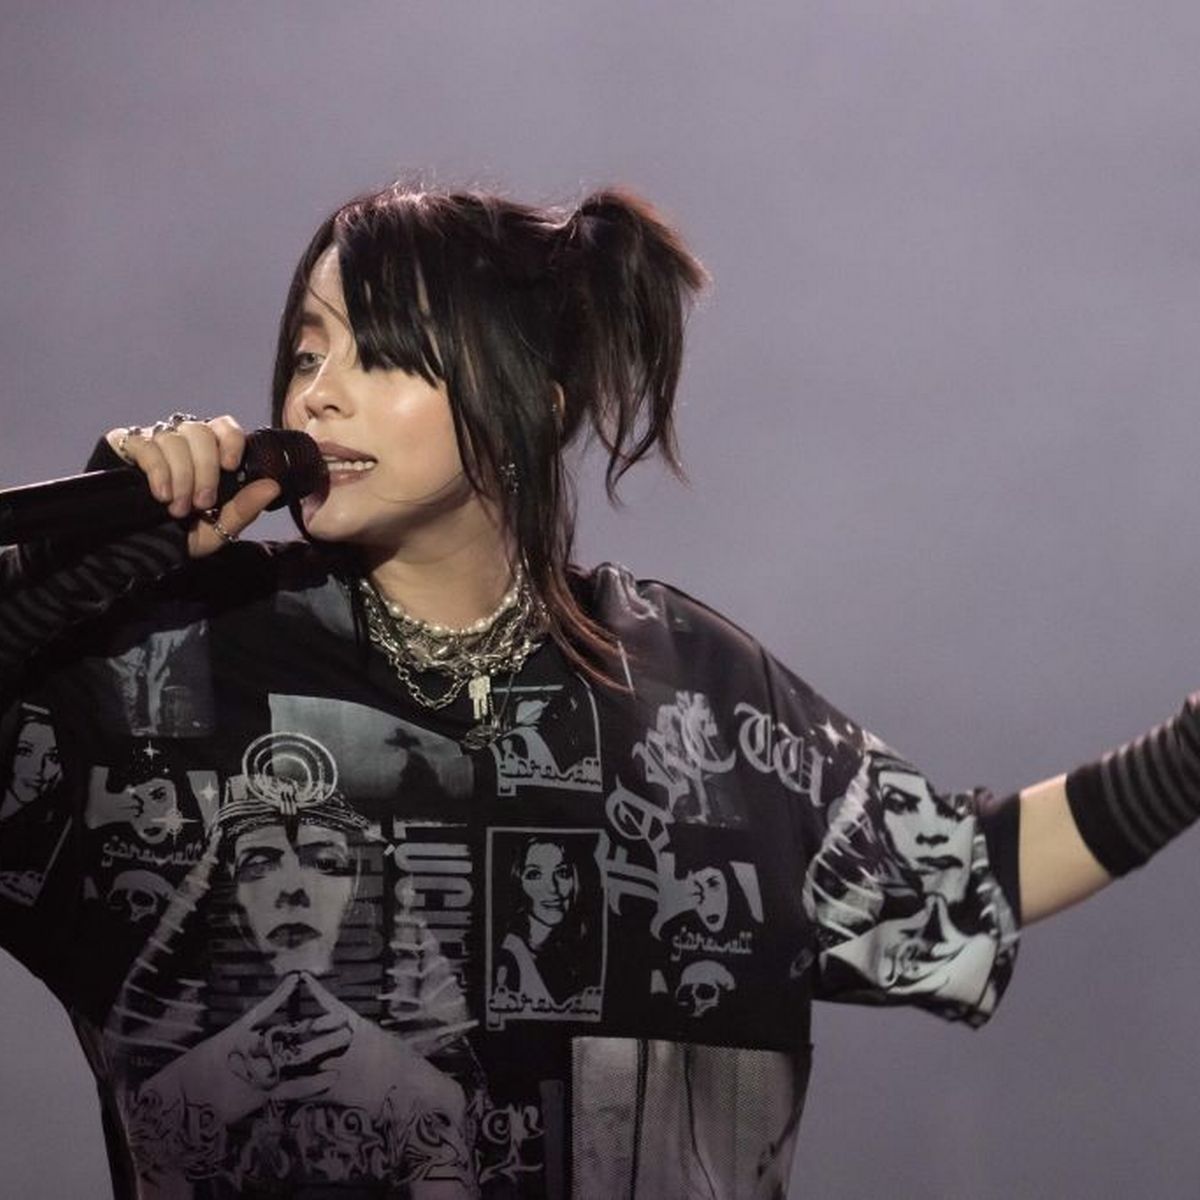 Glastonbury 2022: Five ways Billie Eilish wowed the Pyramid Stage crowd in showstopping performance